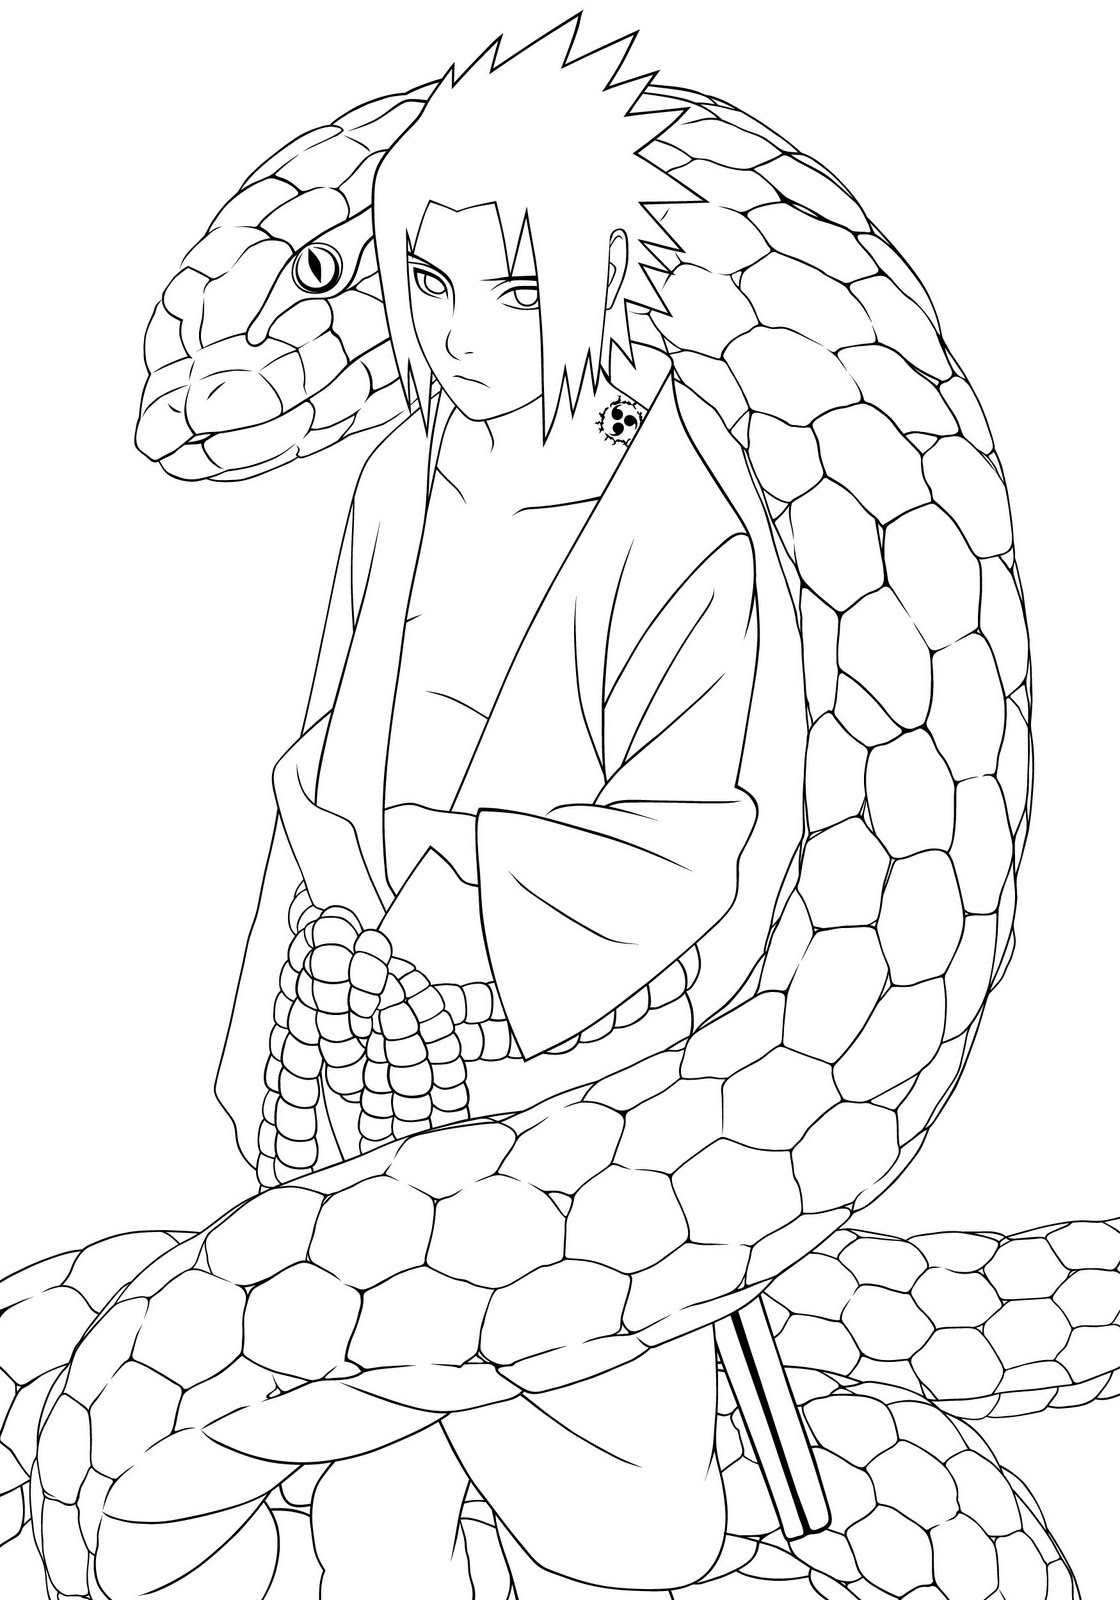 Download Naruto Coloring Pages